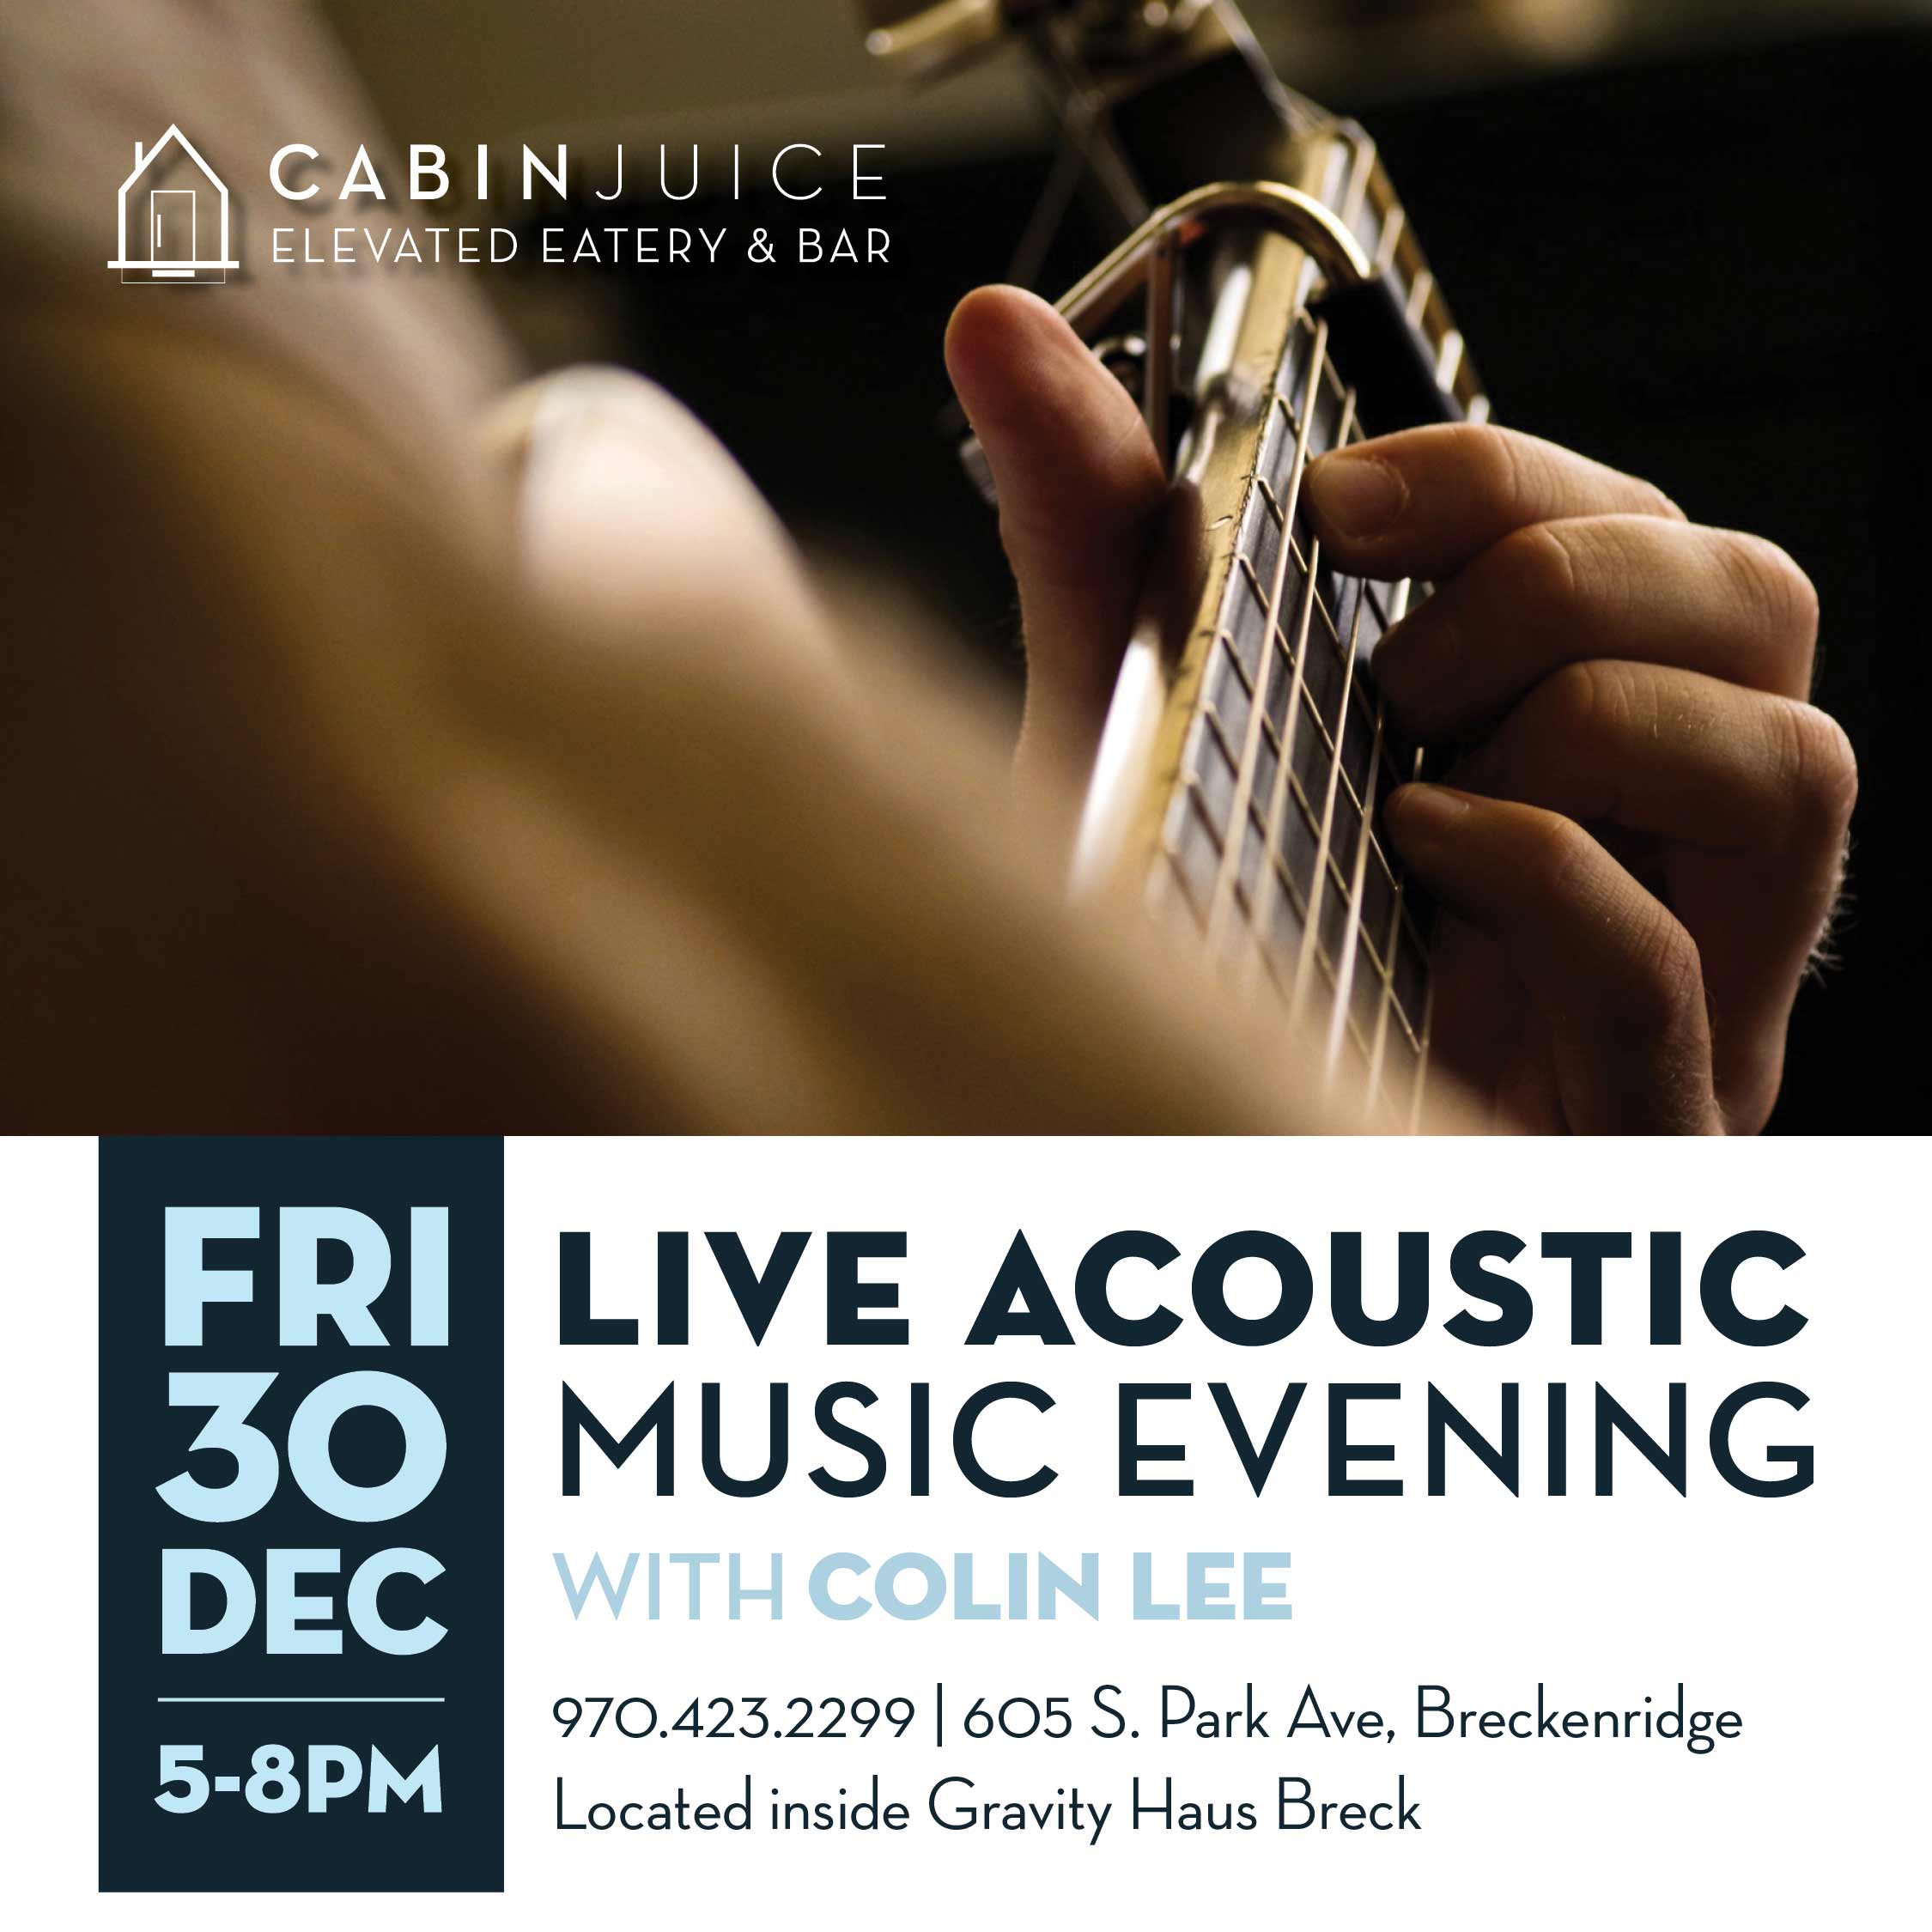 Live acoustic music with Colin Lee at Cabin Juice.